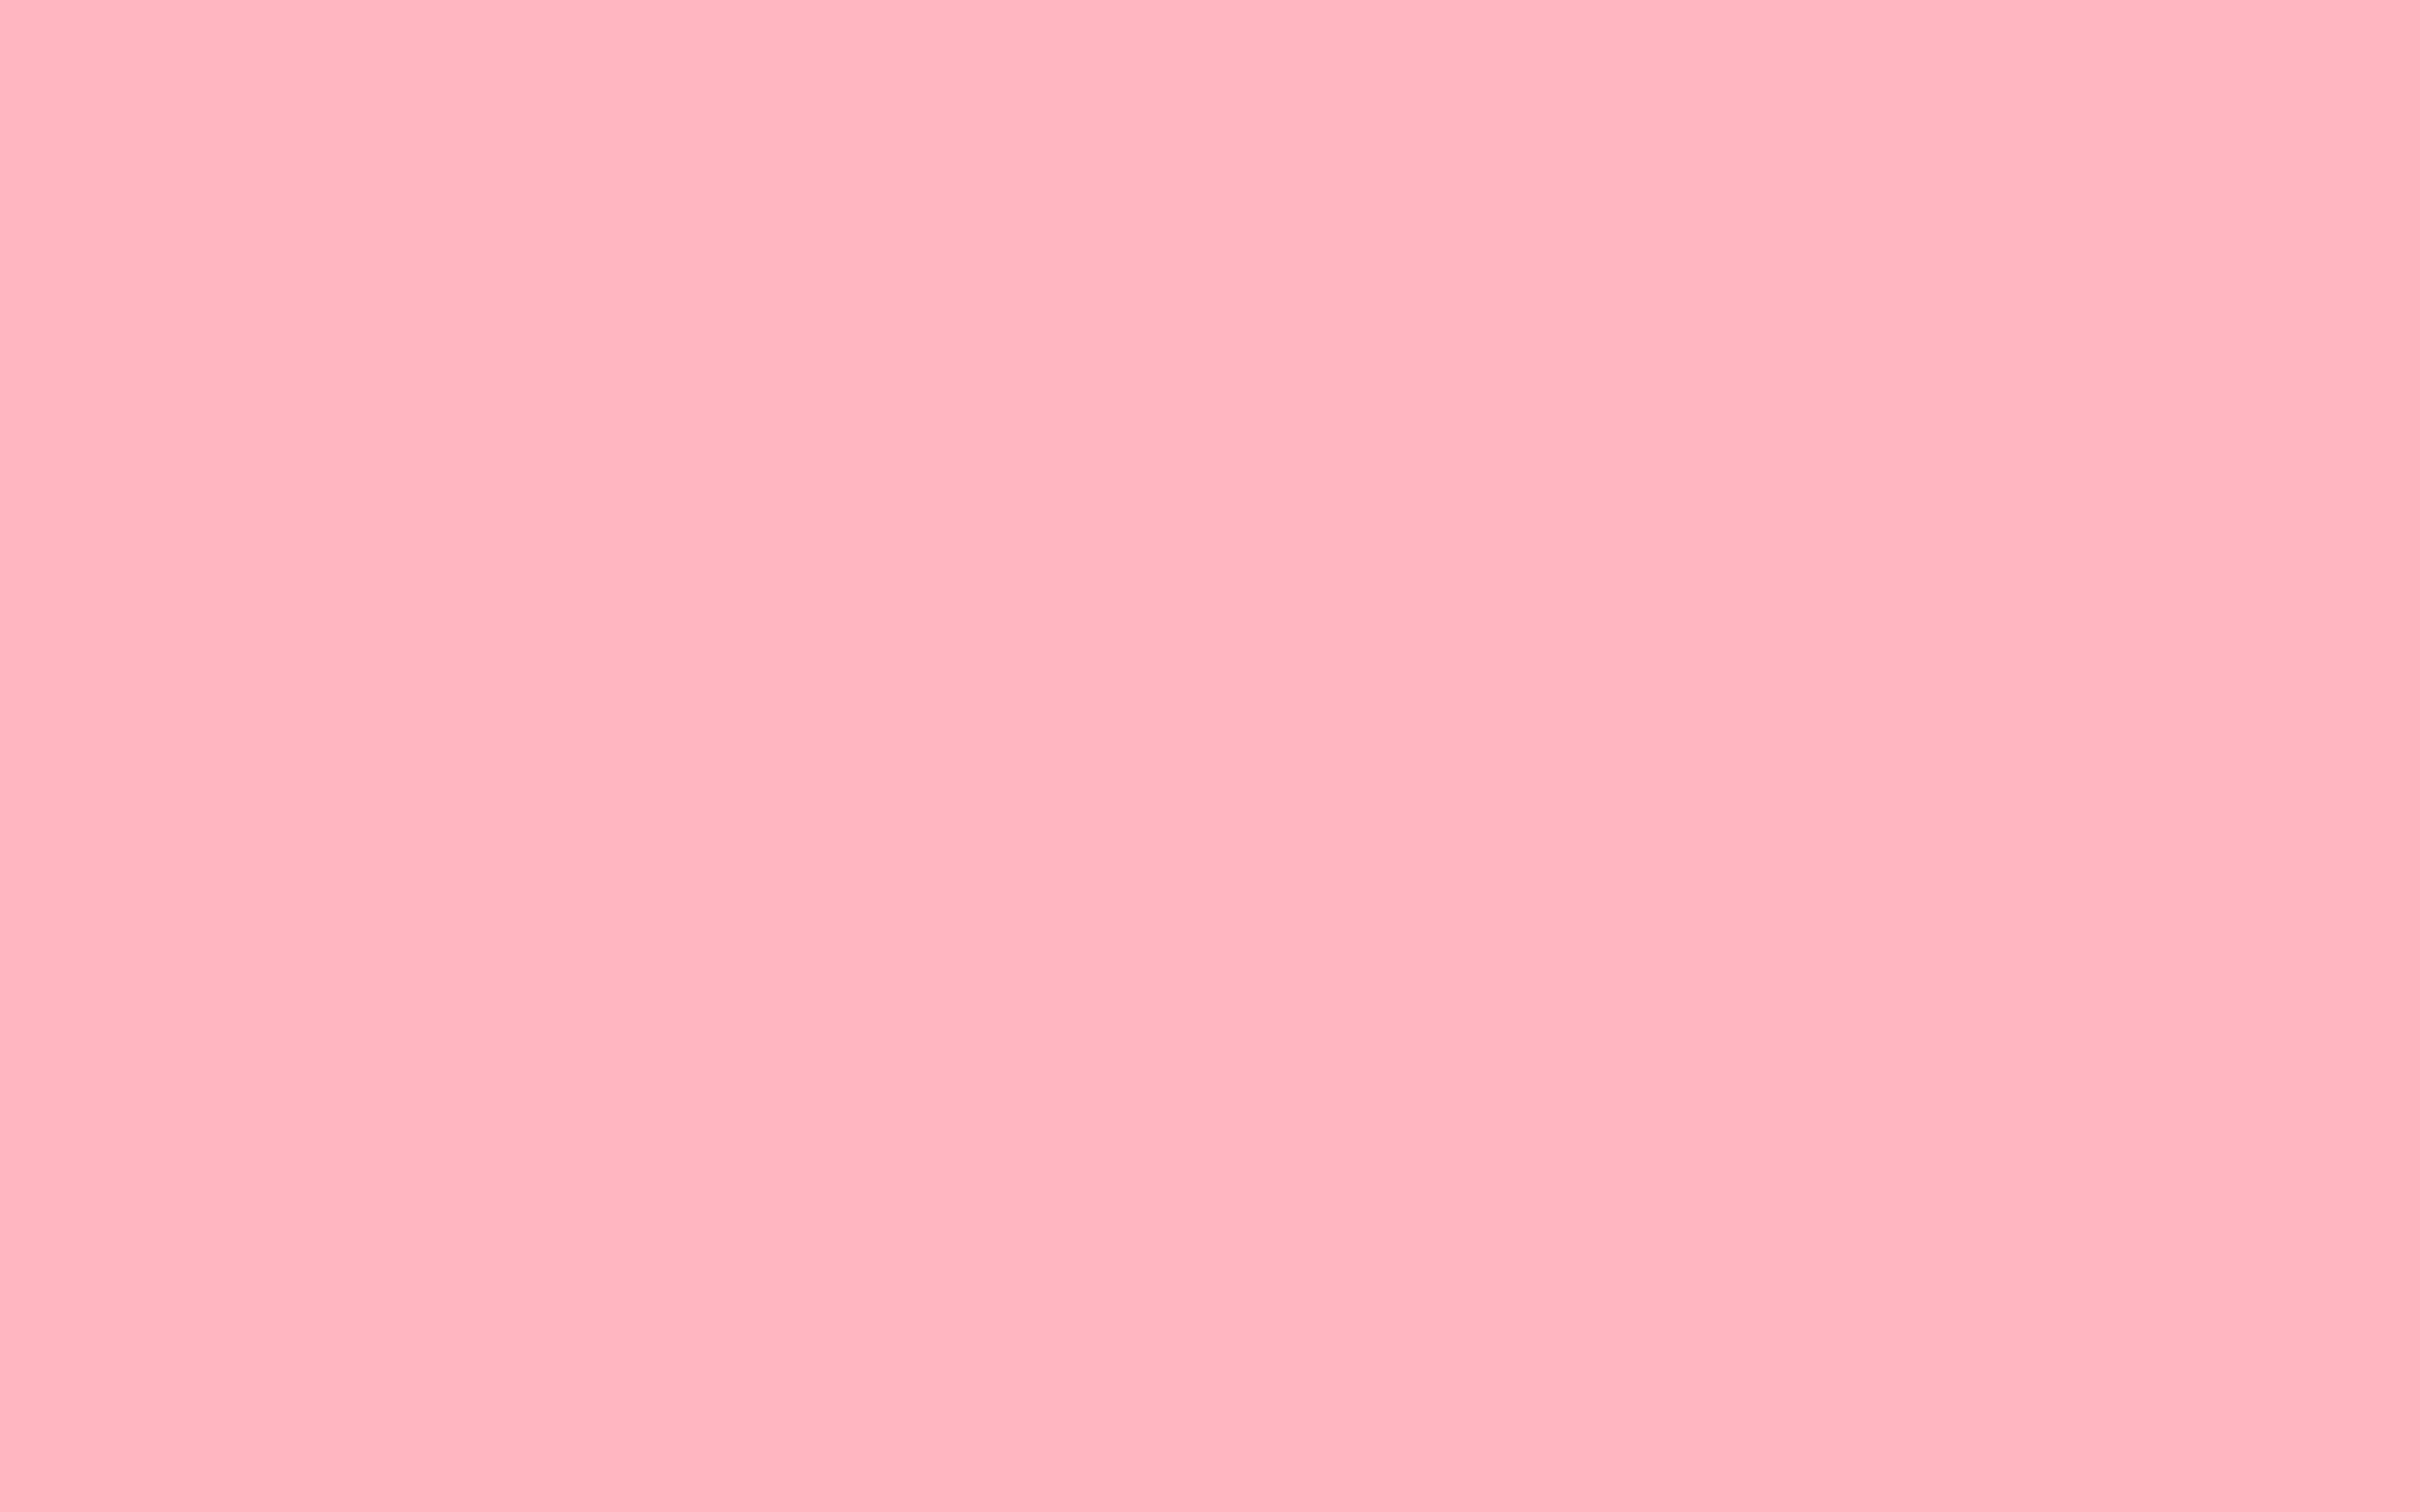 Pink Simple Love Background Wallpaper Image For Free Download  Pngtree